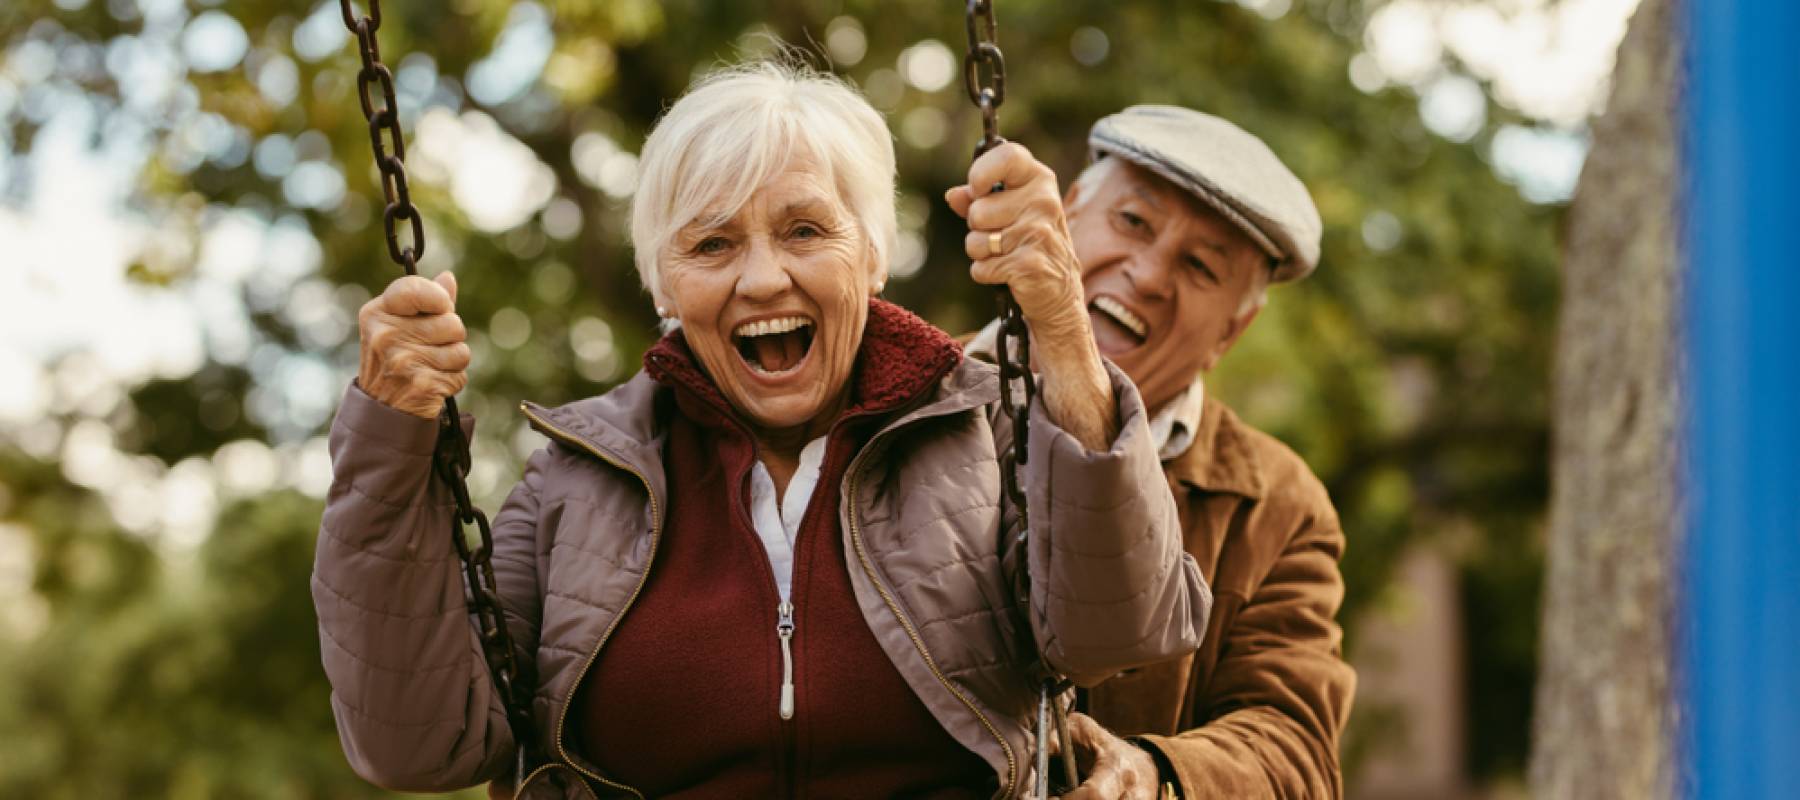 Senior man pushing his female partner on swing in park and having fun together.